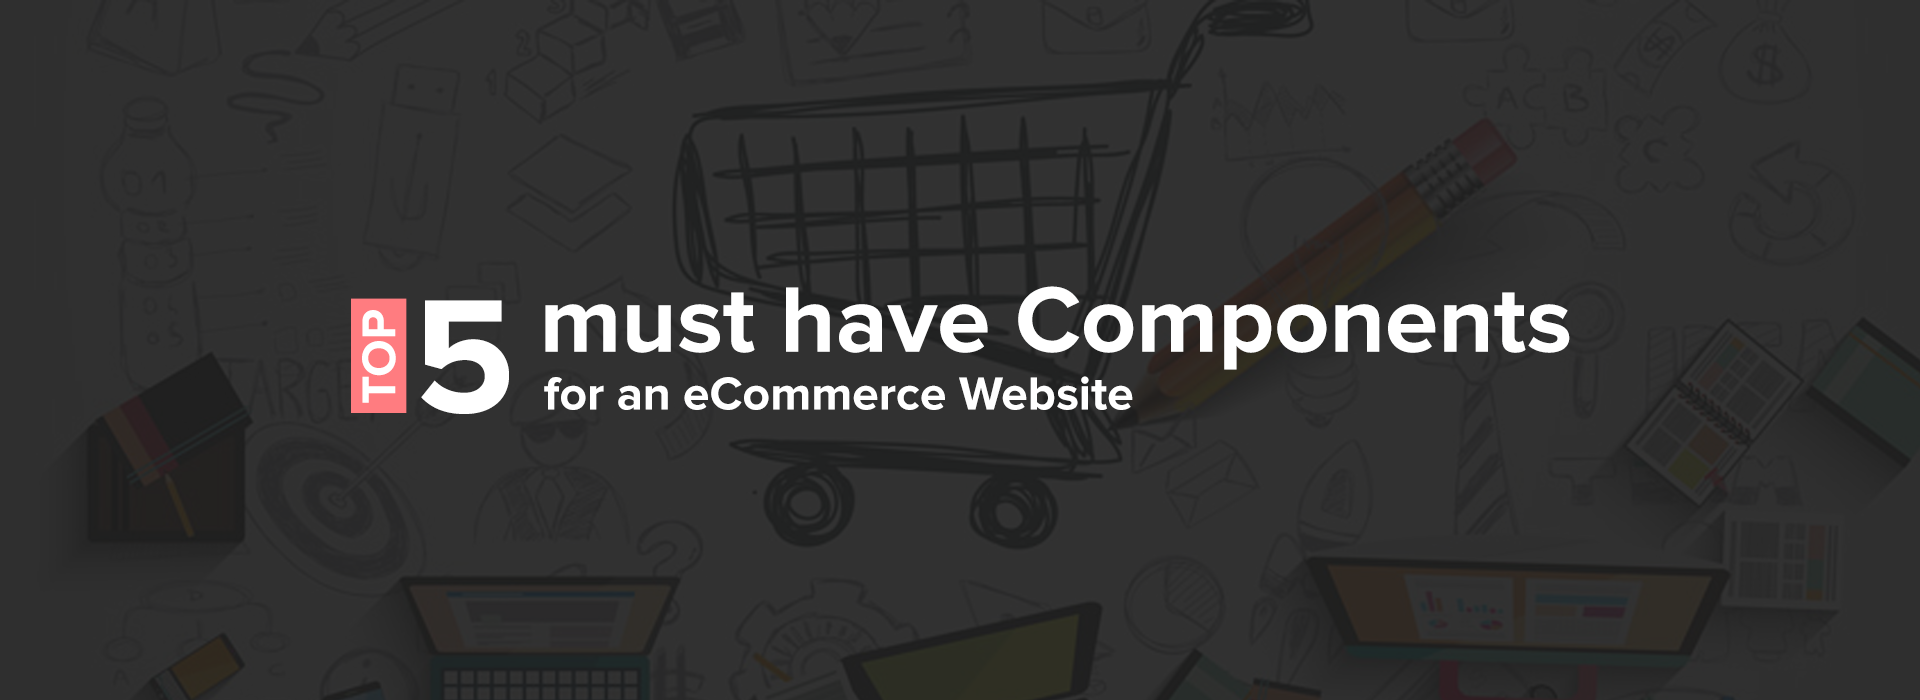 5-Components-for-eCommerce-website-eCommfy